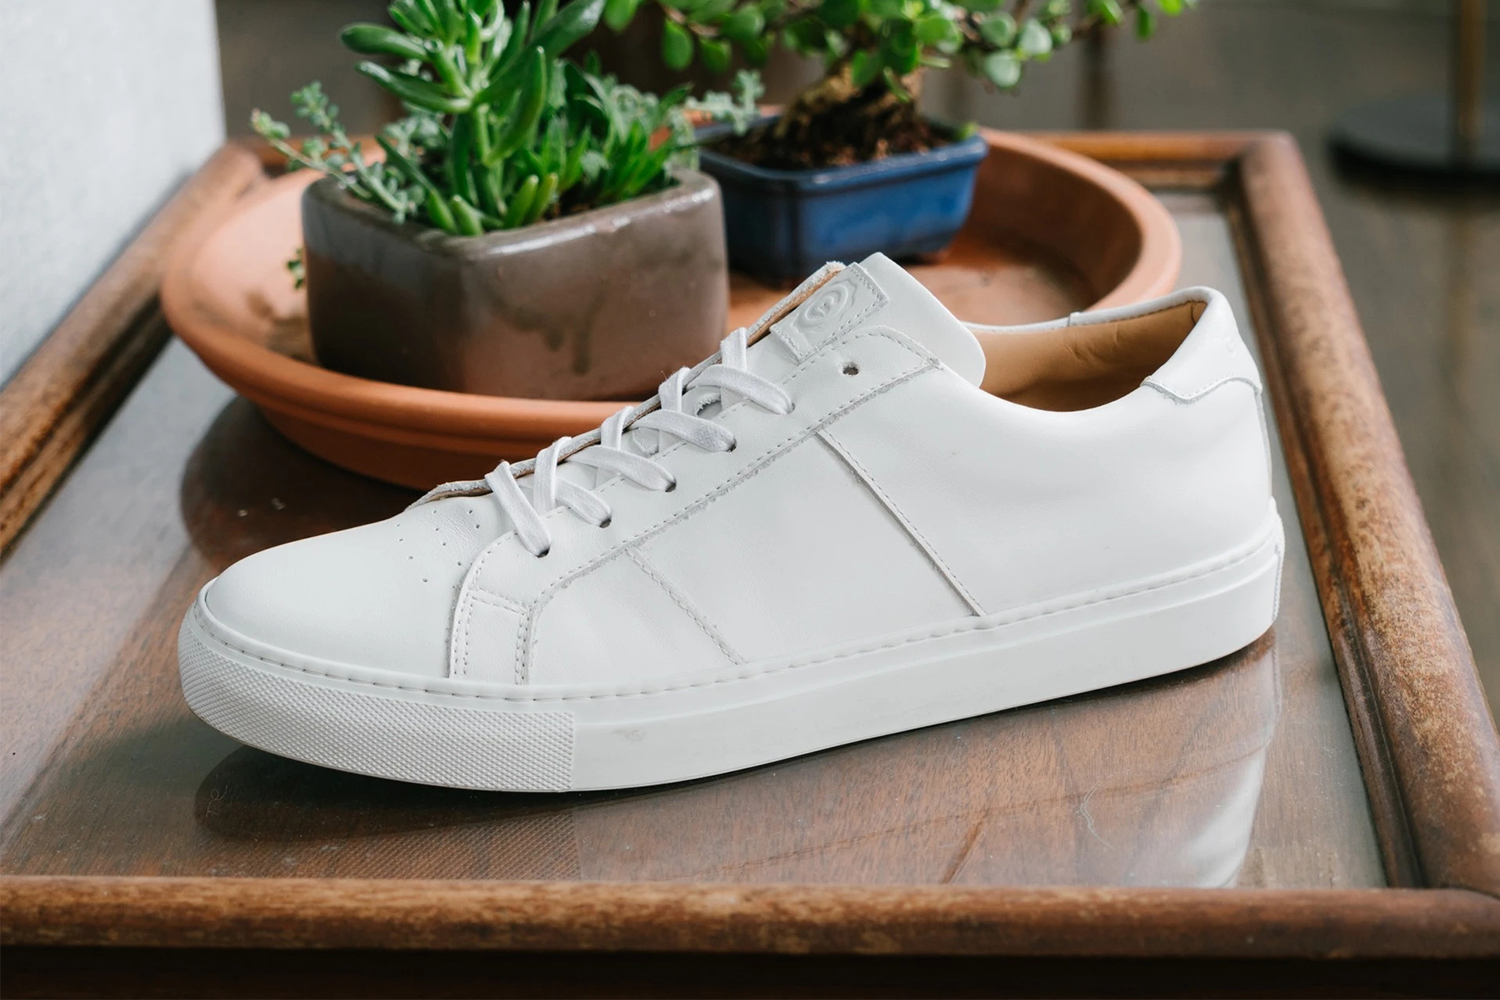 Greats' Quintessential White Sneaker Is 